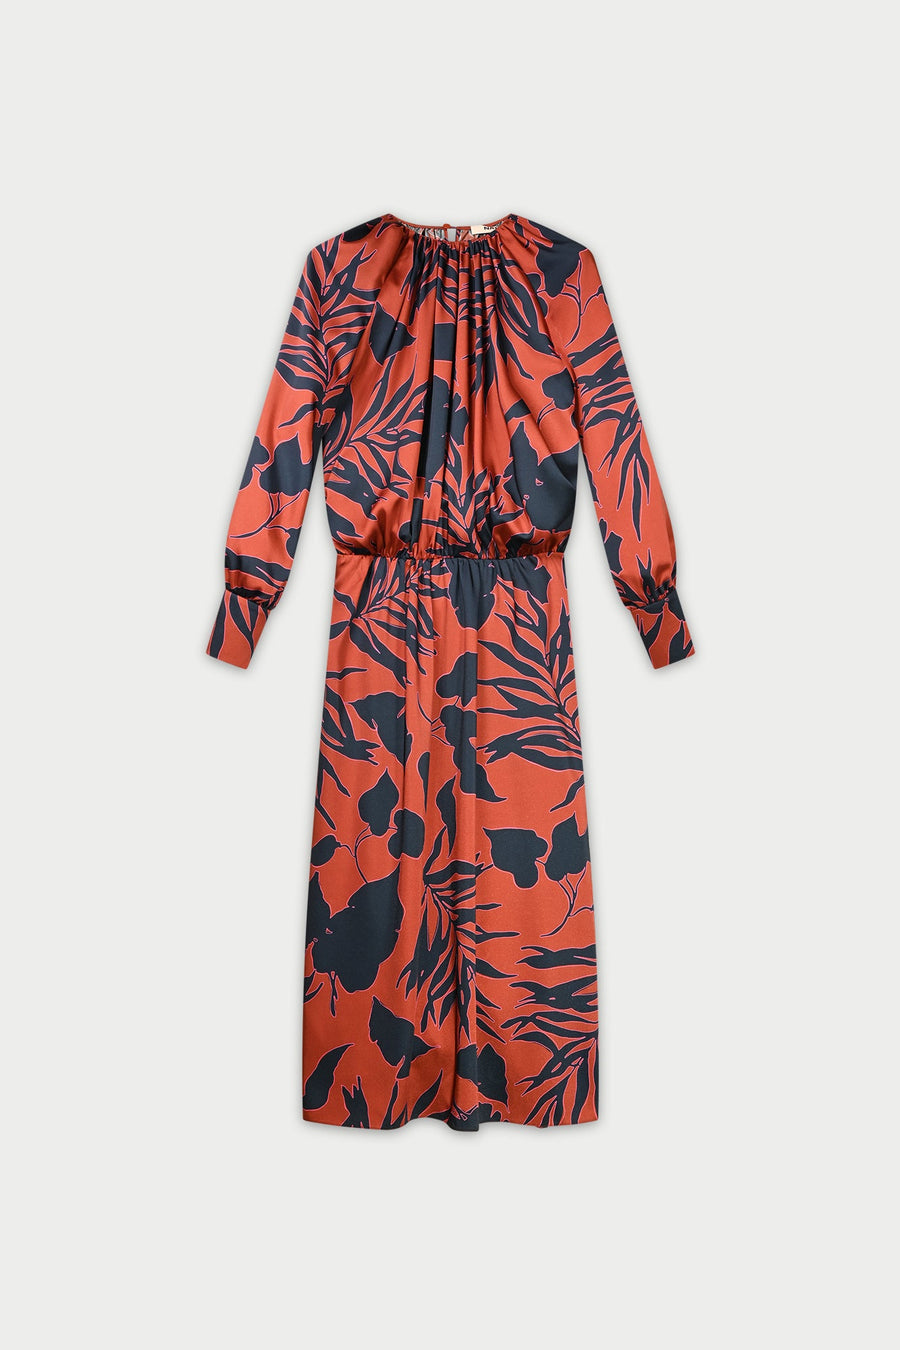 NATAN VECU DRESS IN VISCOSE WITH FLORAL PRINT